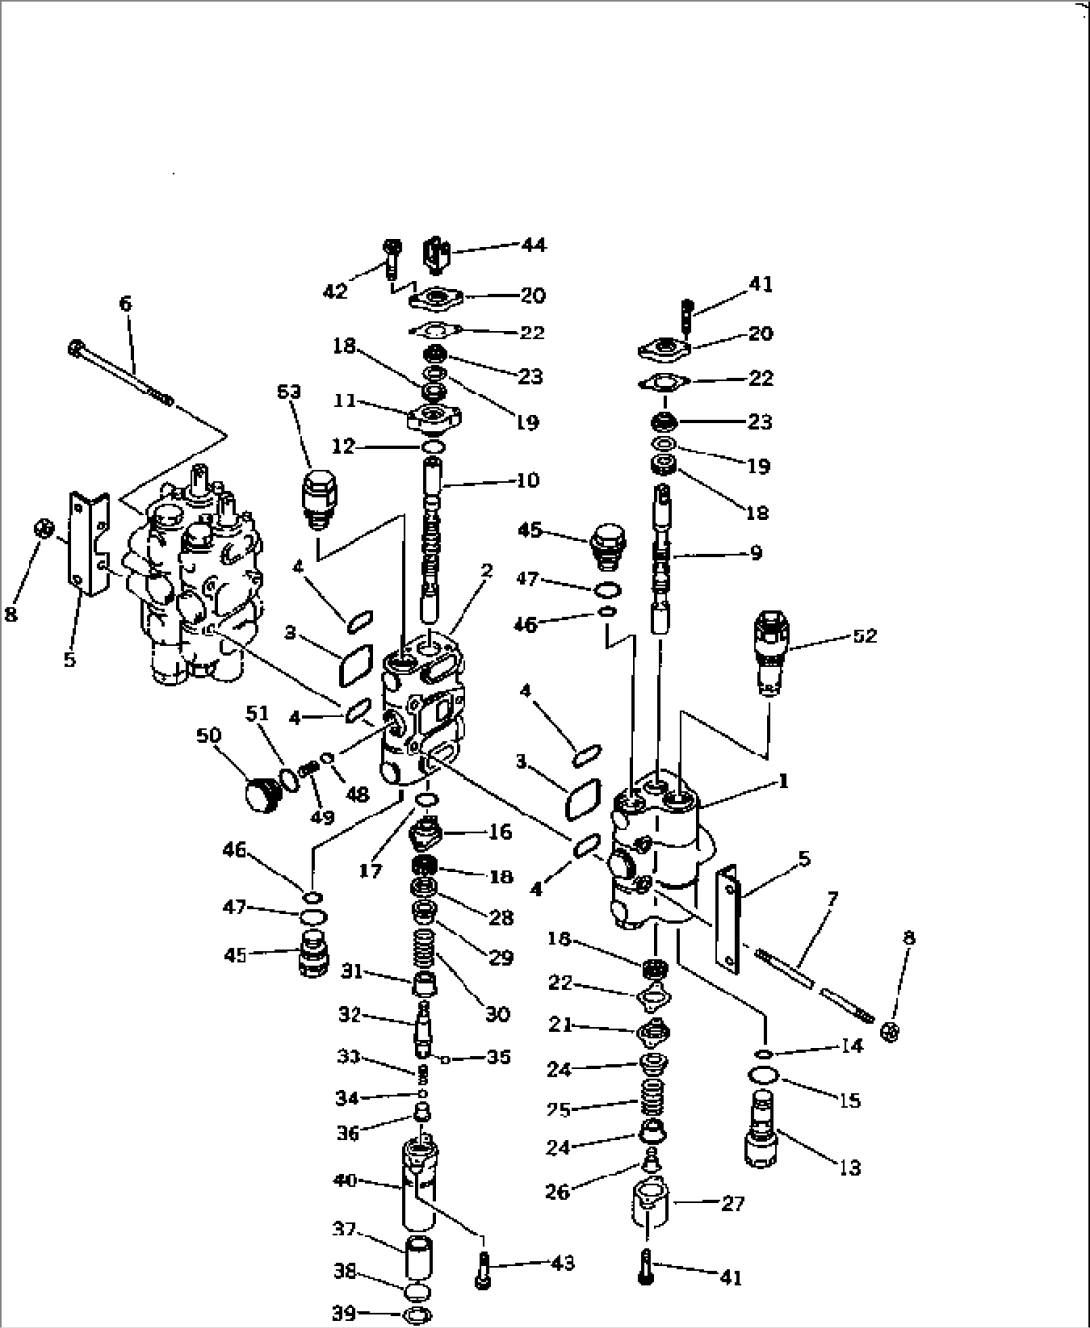 WORK EQUIPMENT VALVE (1/3) (FOR 3-POINT HITCH)